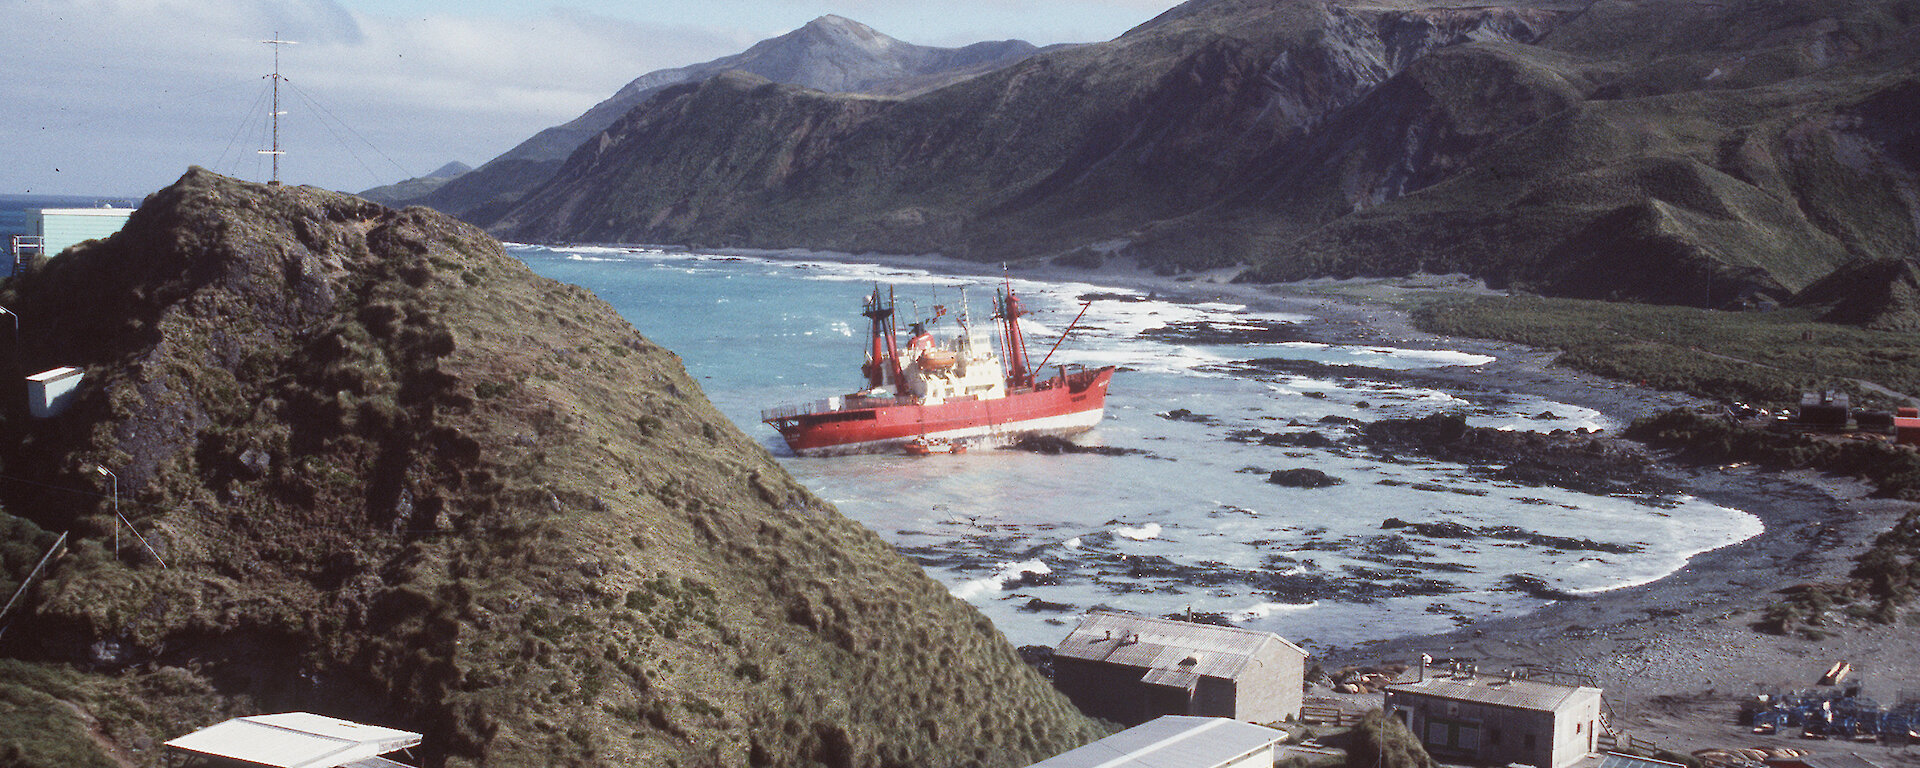 Grounded ship, the Nella Dan, up on rocks near Macquarie Island station buildings